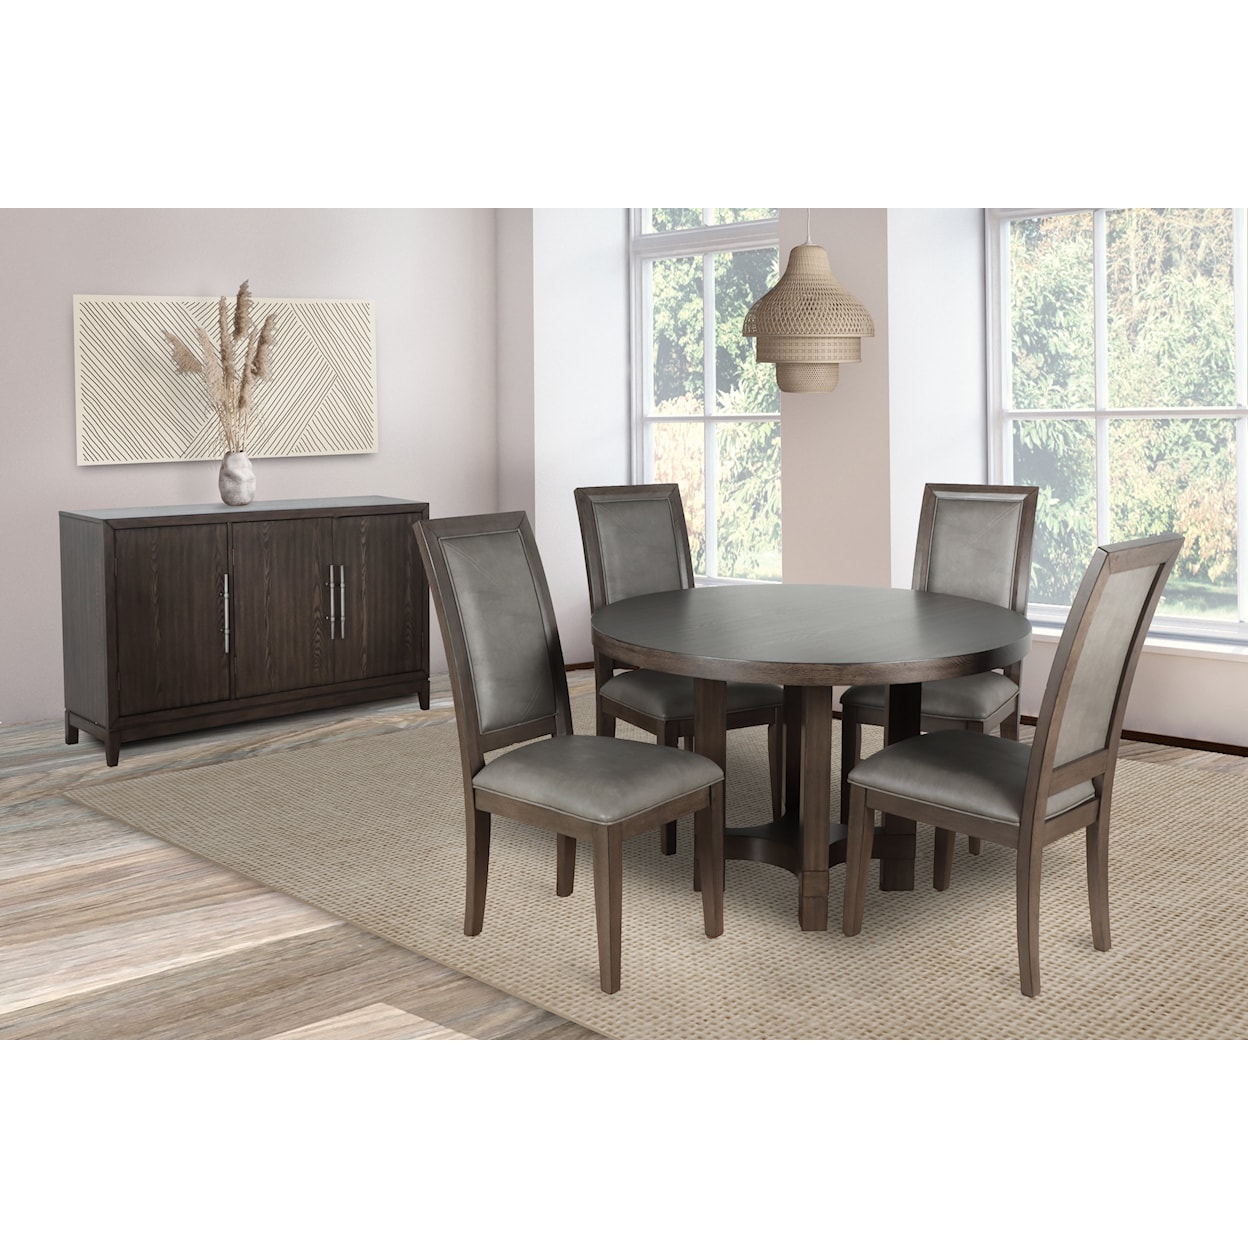 New Classic Furniture Cityscape Dining Room Set